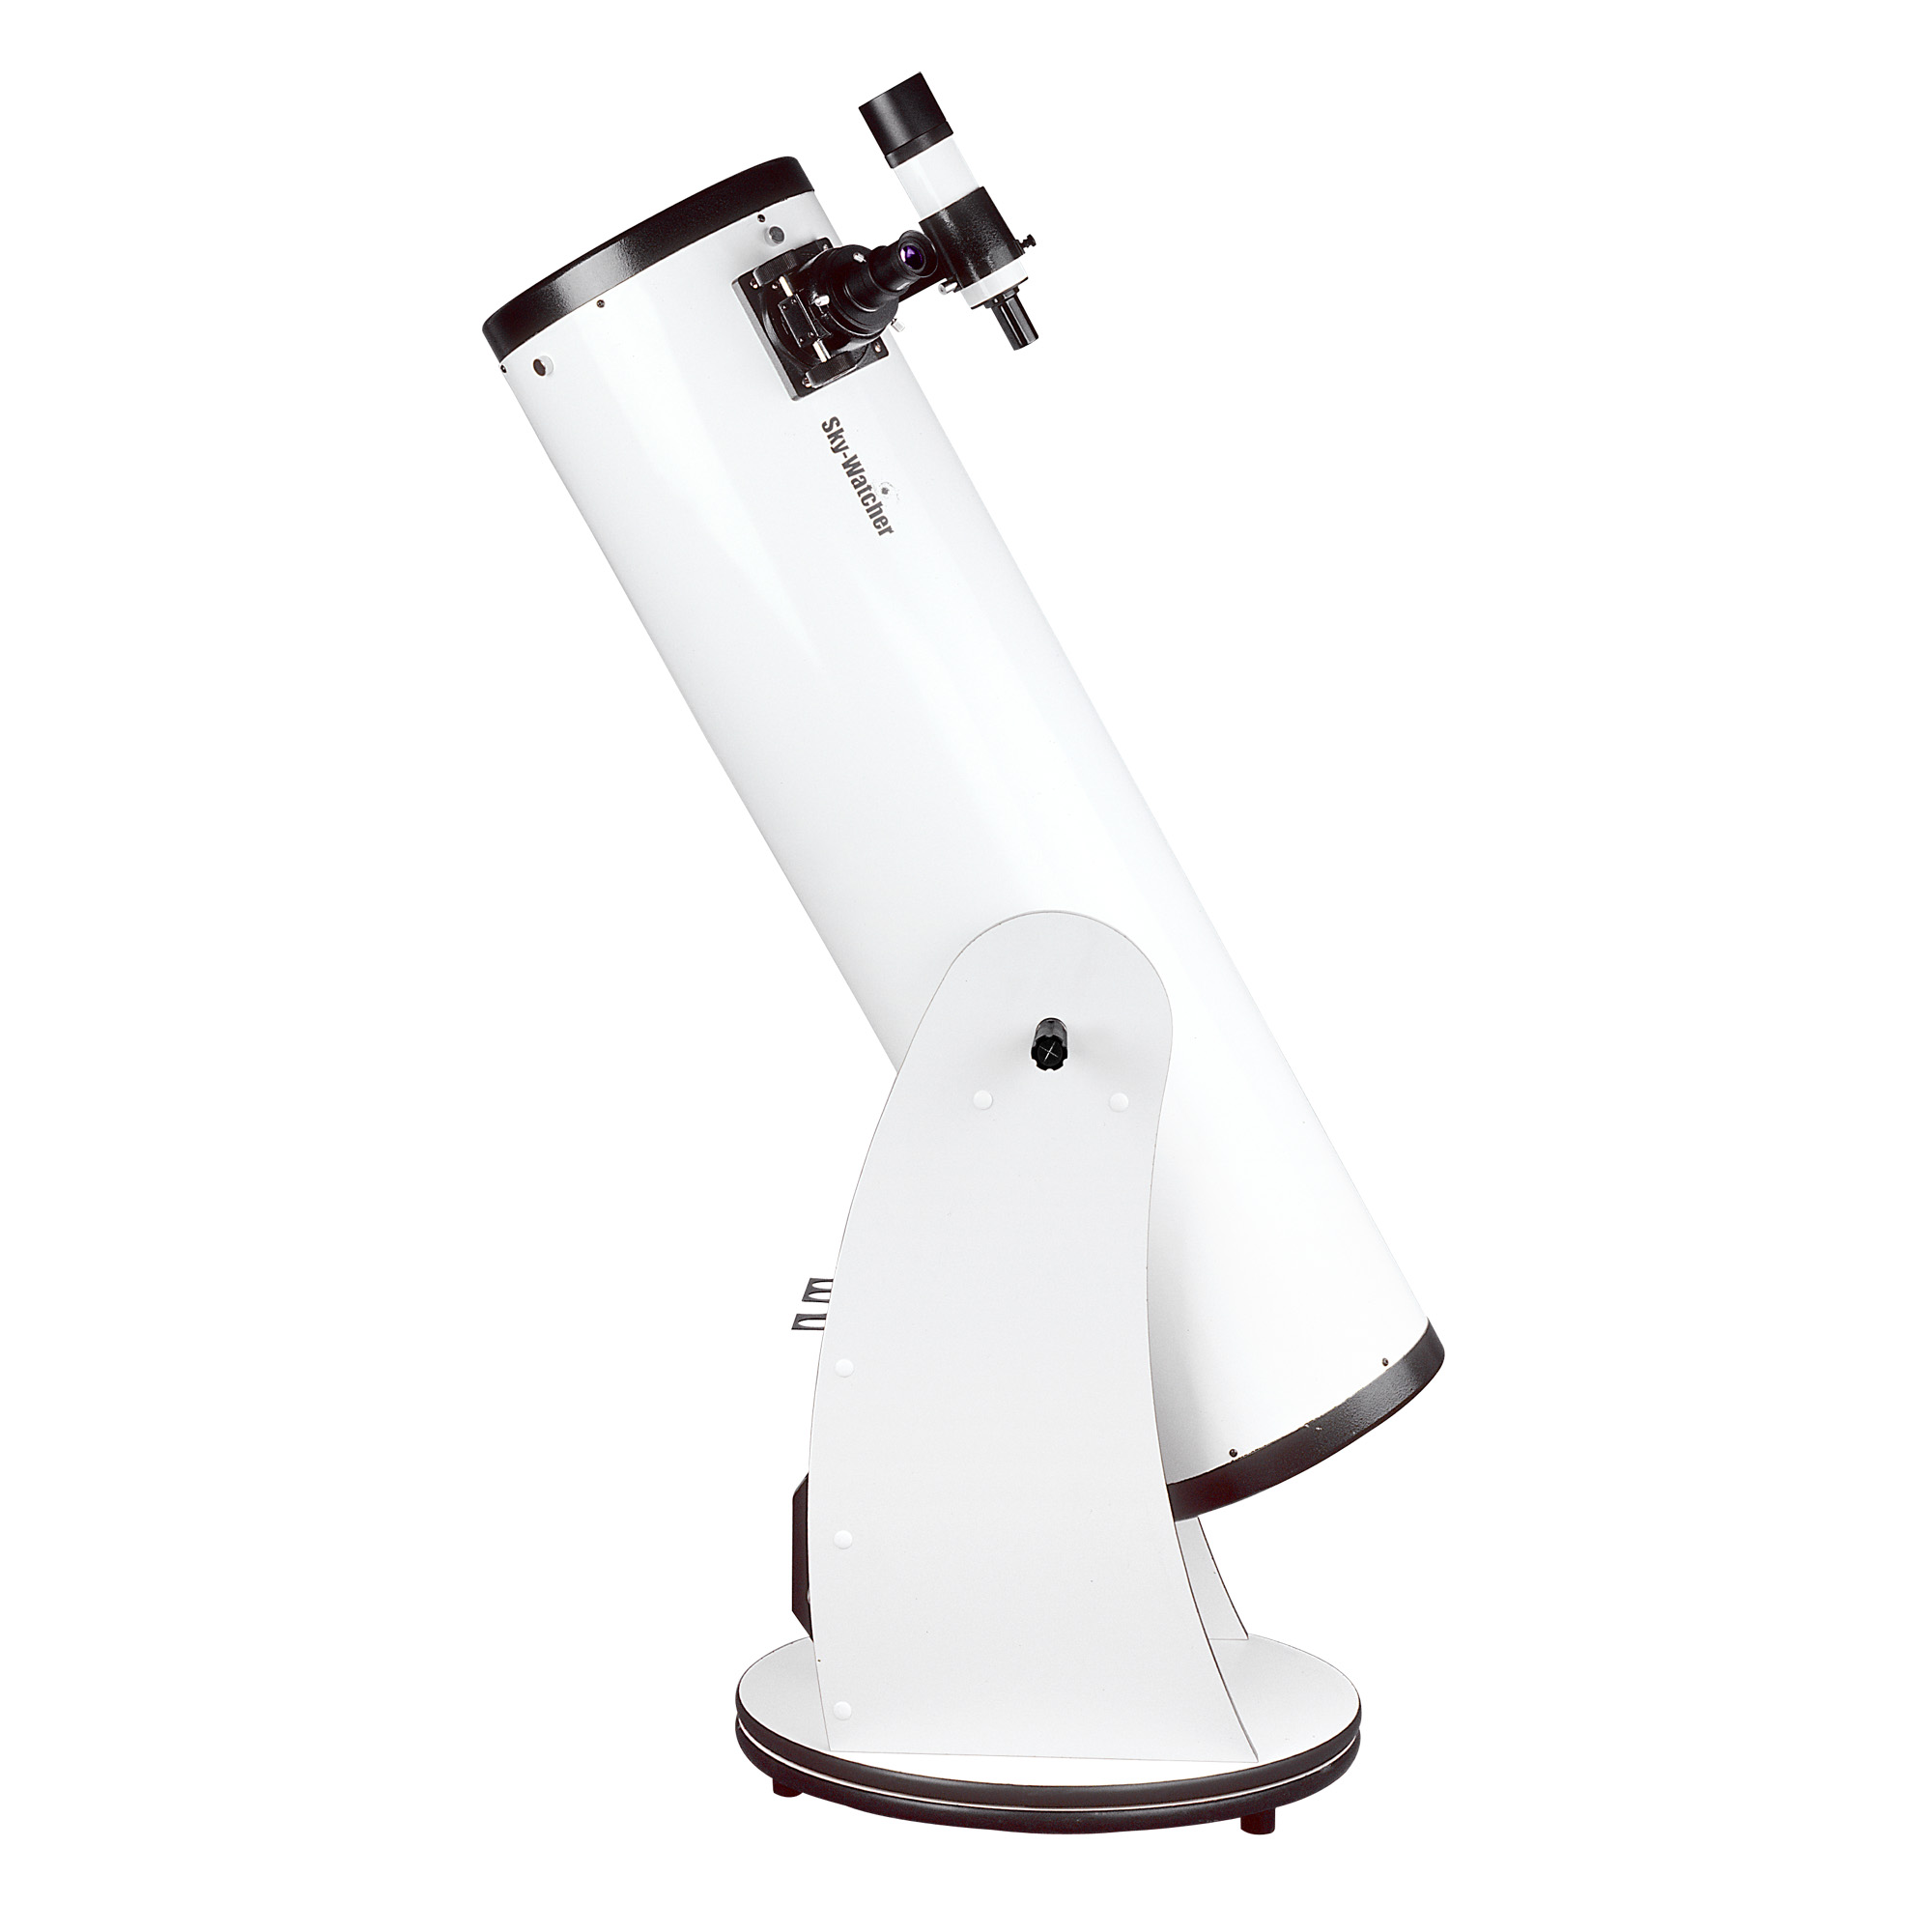 Sky-Watcher 10" Dobsonian Telescope with Tension Control - Click Image to Close